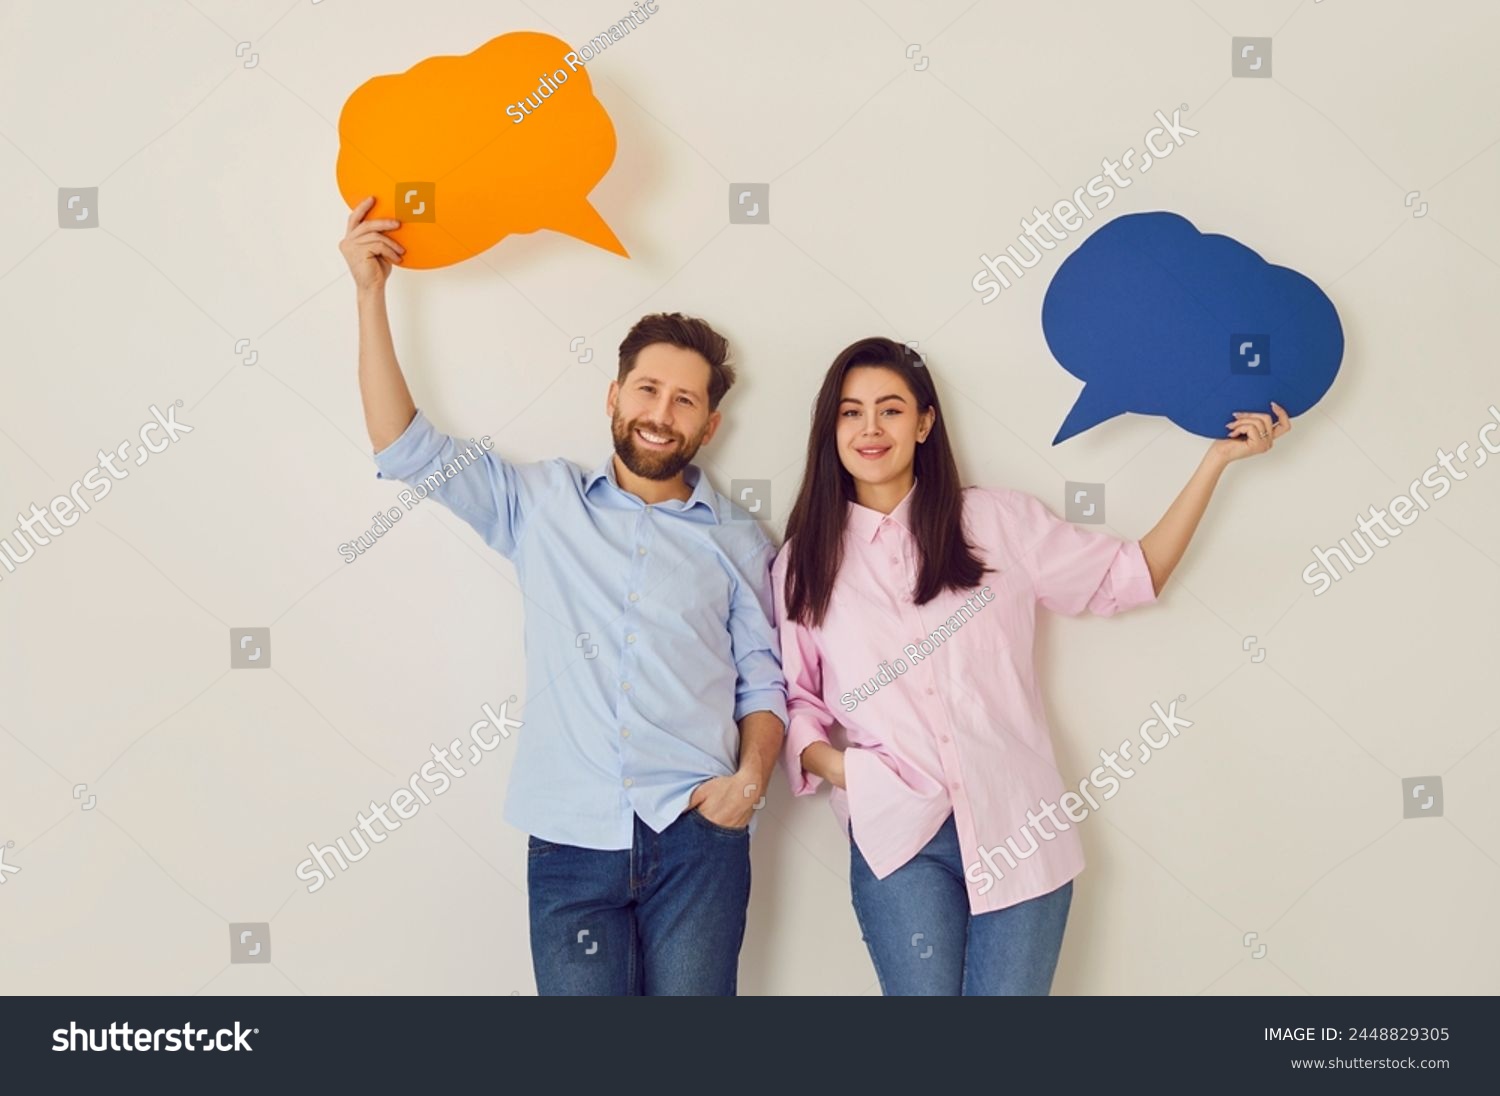 Young happy couple, paper speech balloons above, man, woman pair happy communication, dialog. People interact, information, express feeling, good conversation, discourse, chatting in close relations #2448829305